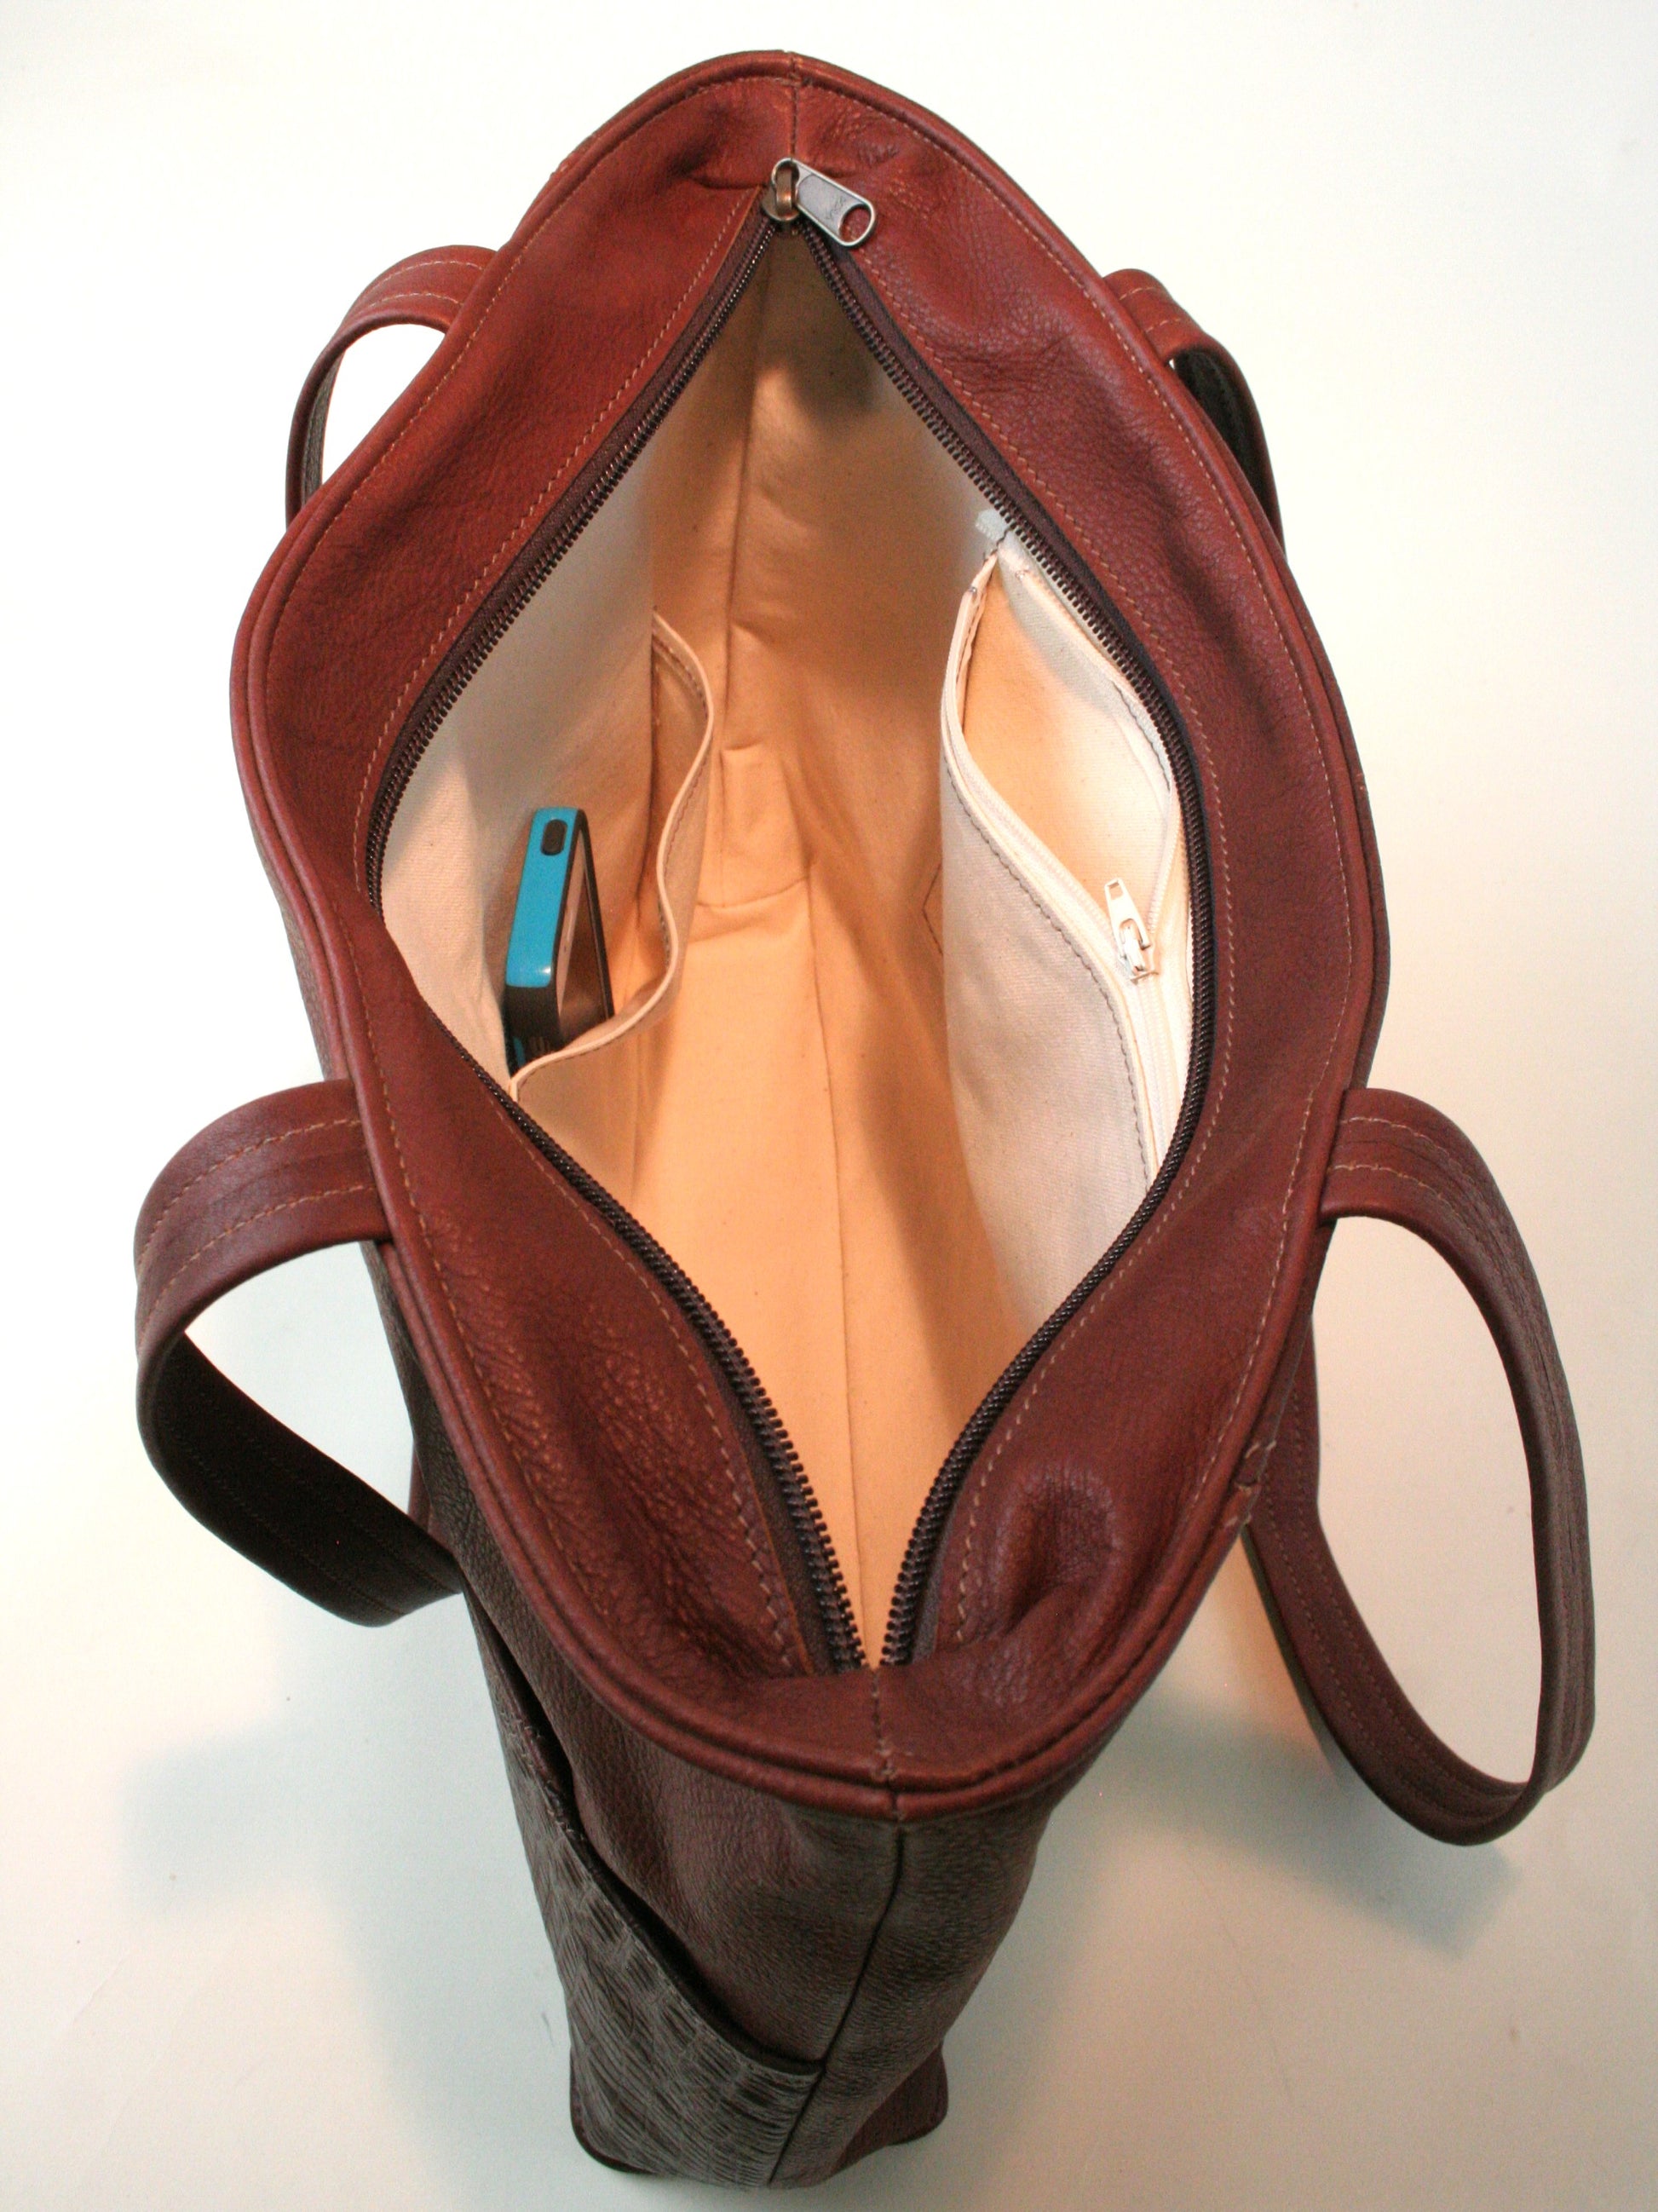 Canvas lined interior of leather tote bag.